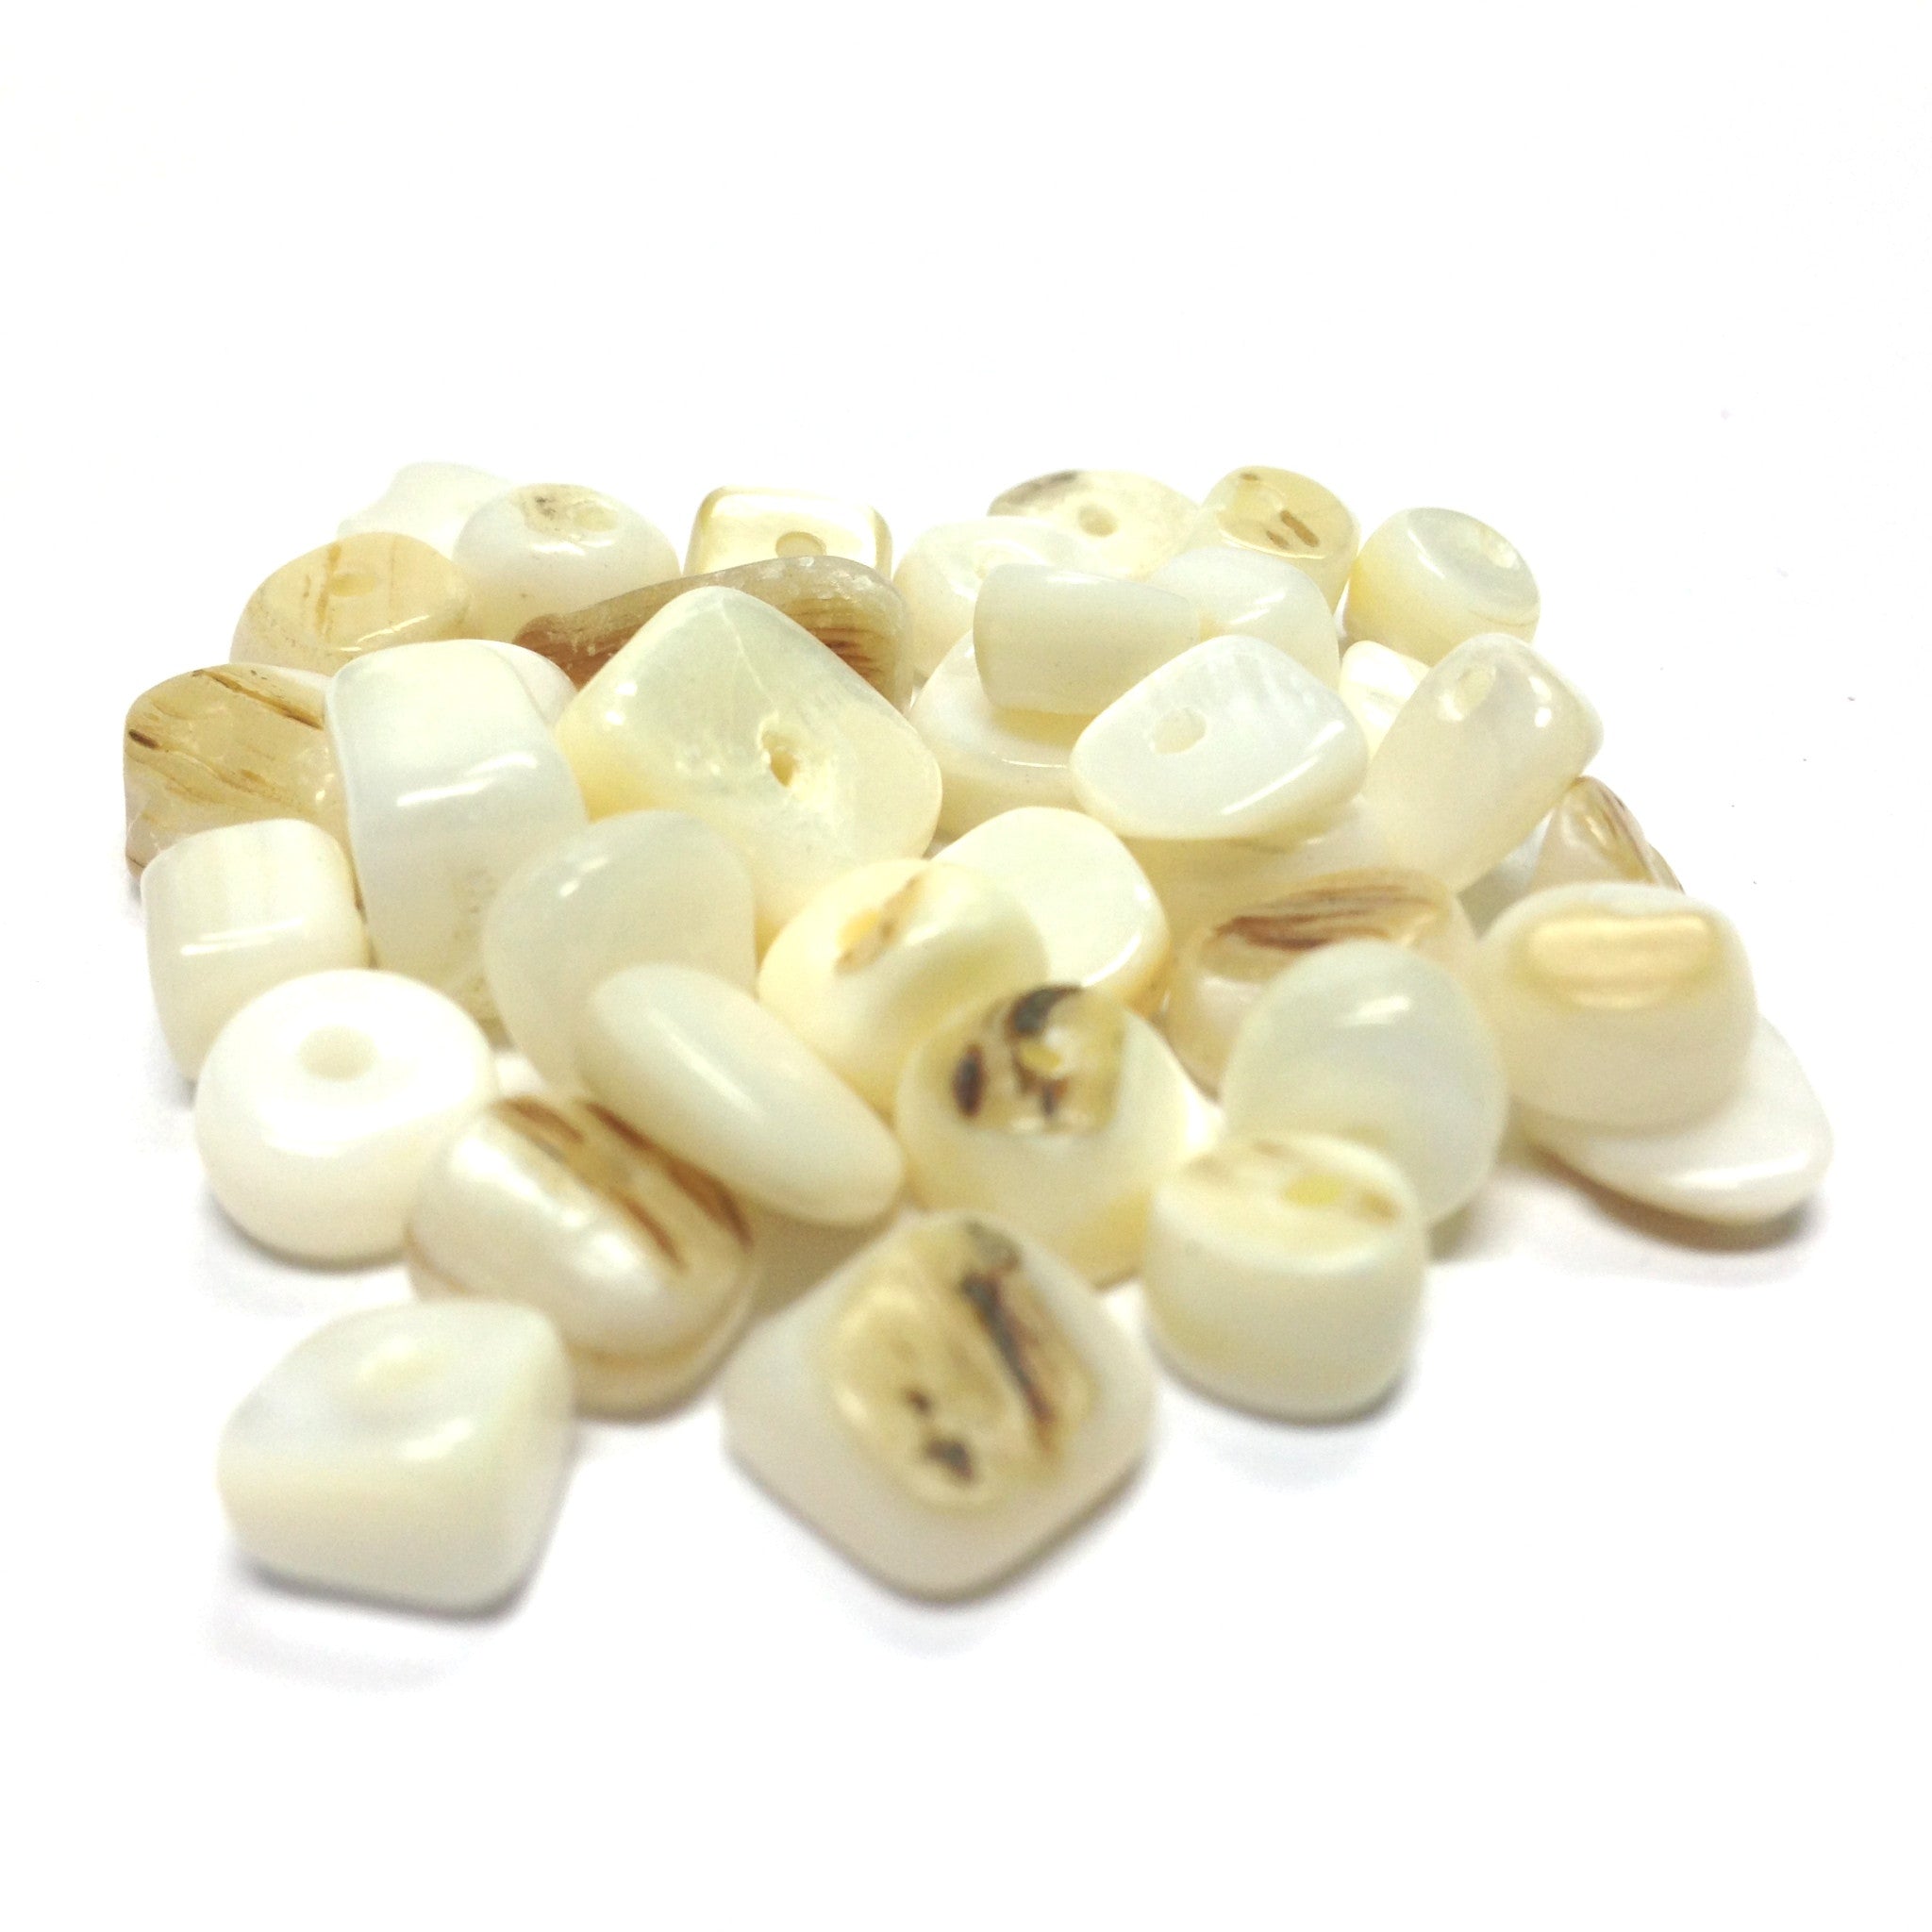 7-12MM White MOP Shell Assorted Beads (144 pieces)